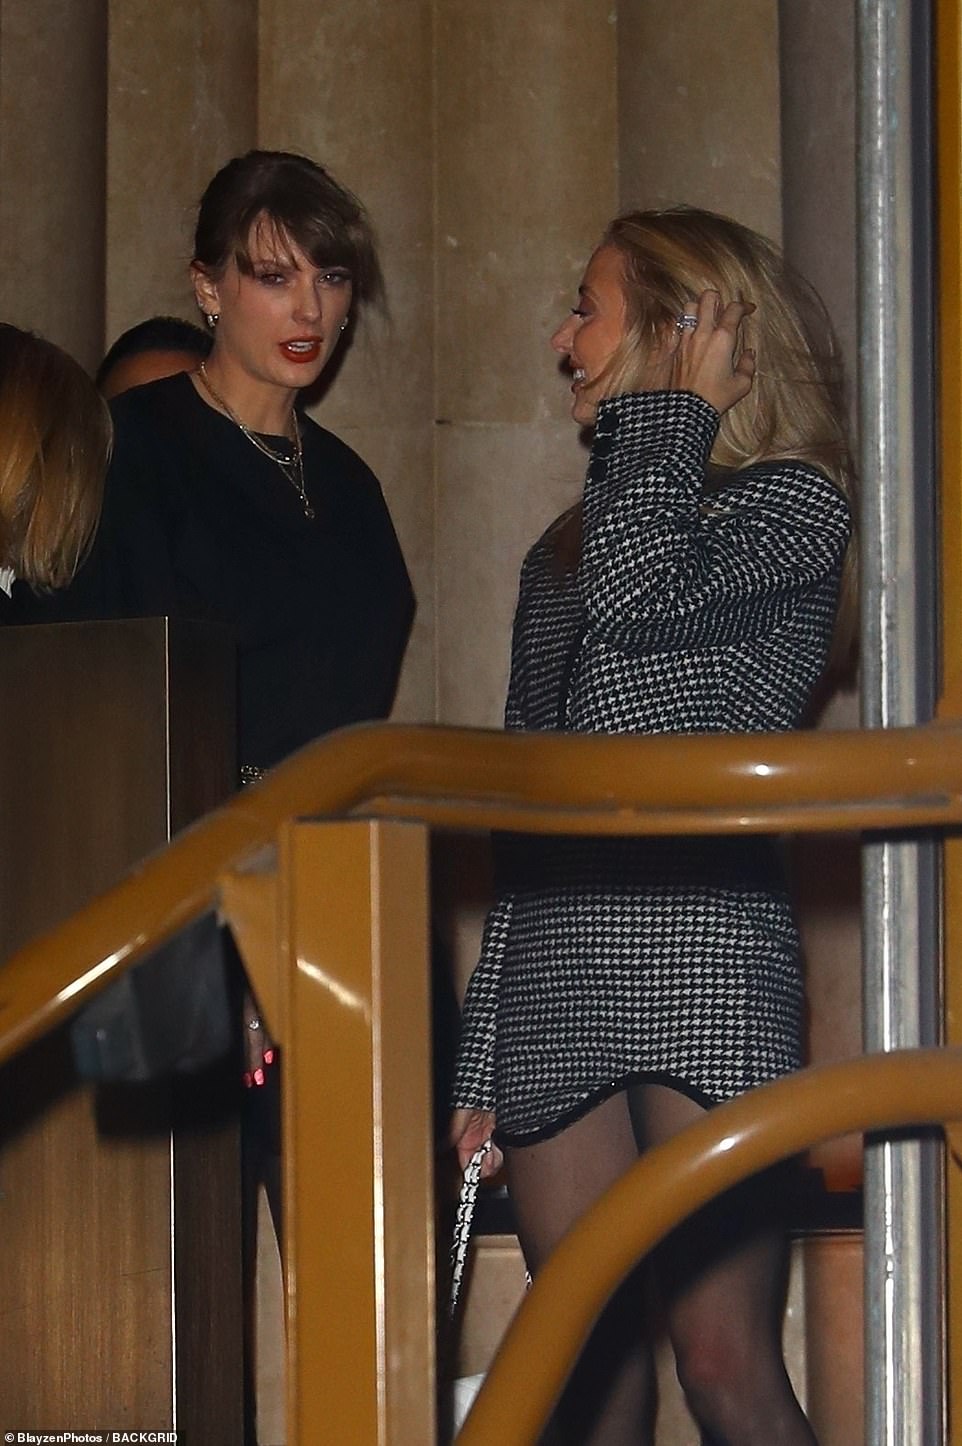 Before leaving, Taylor and Brittany were spotted holding a brief and lighthearted conversation with each other while standing in the doorway